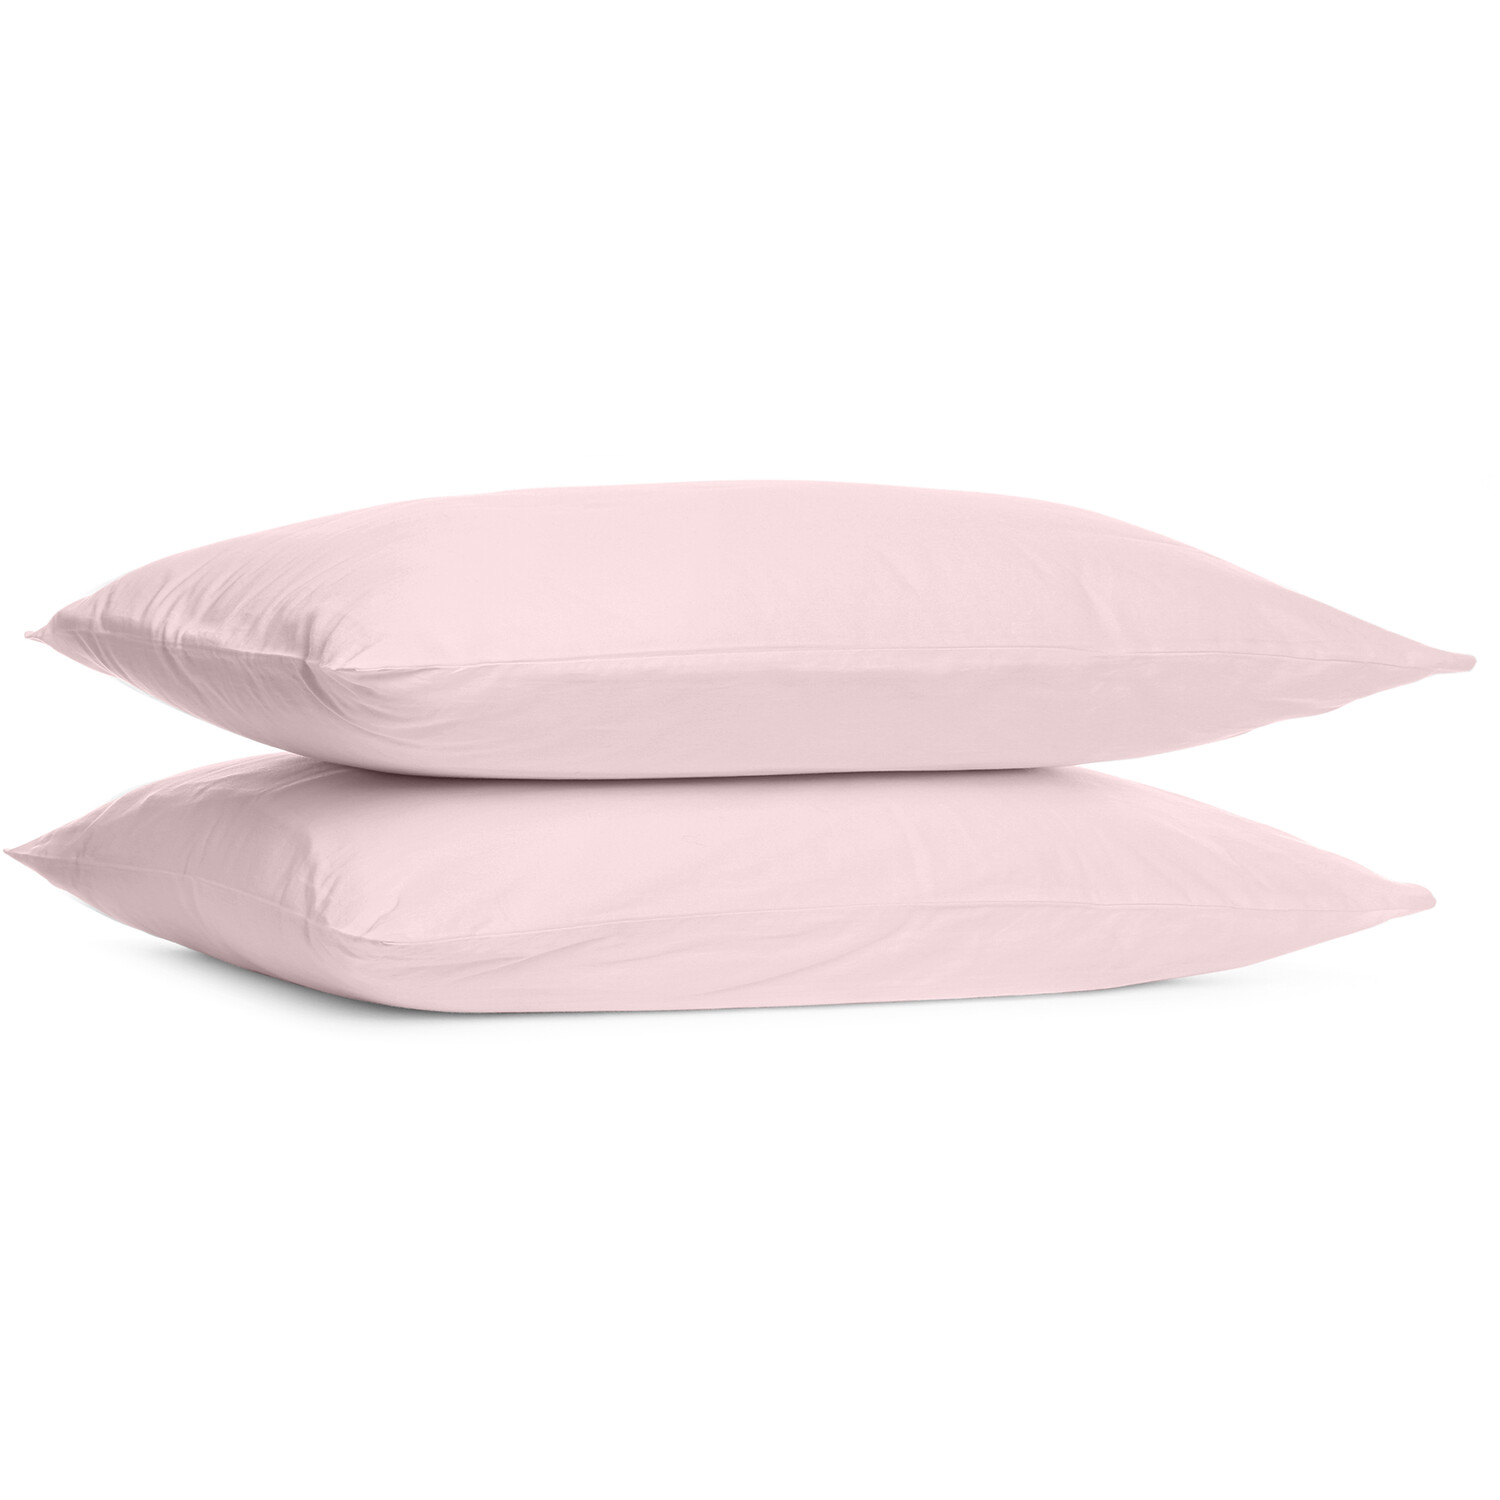 Pack of 2 Polycotton Oxford Pillowcases - Blush Image